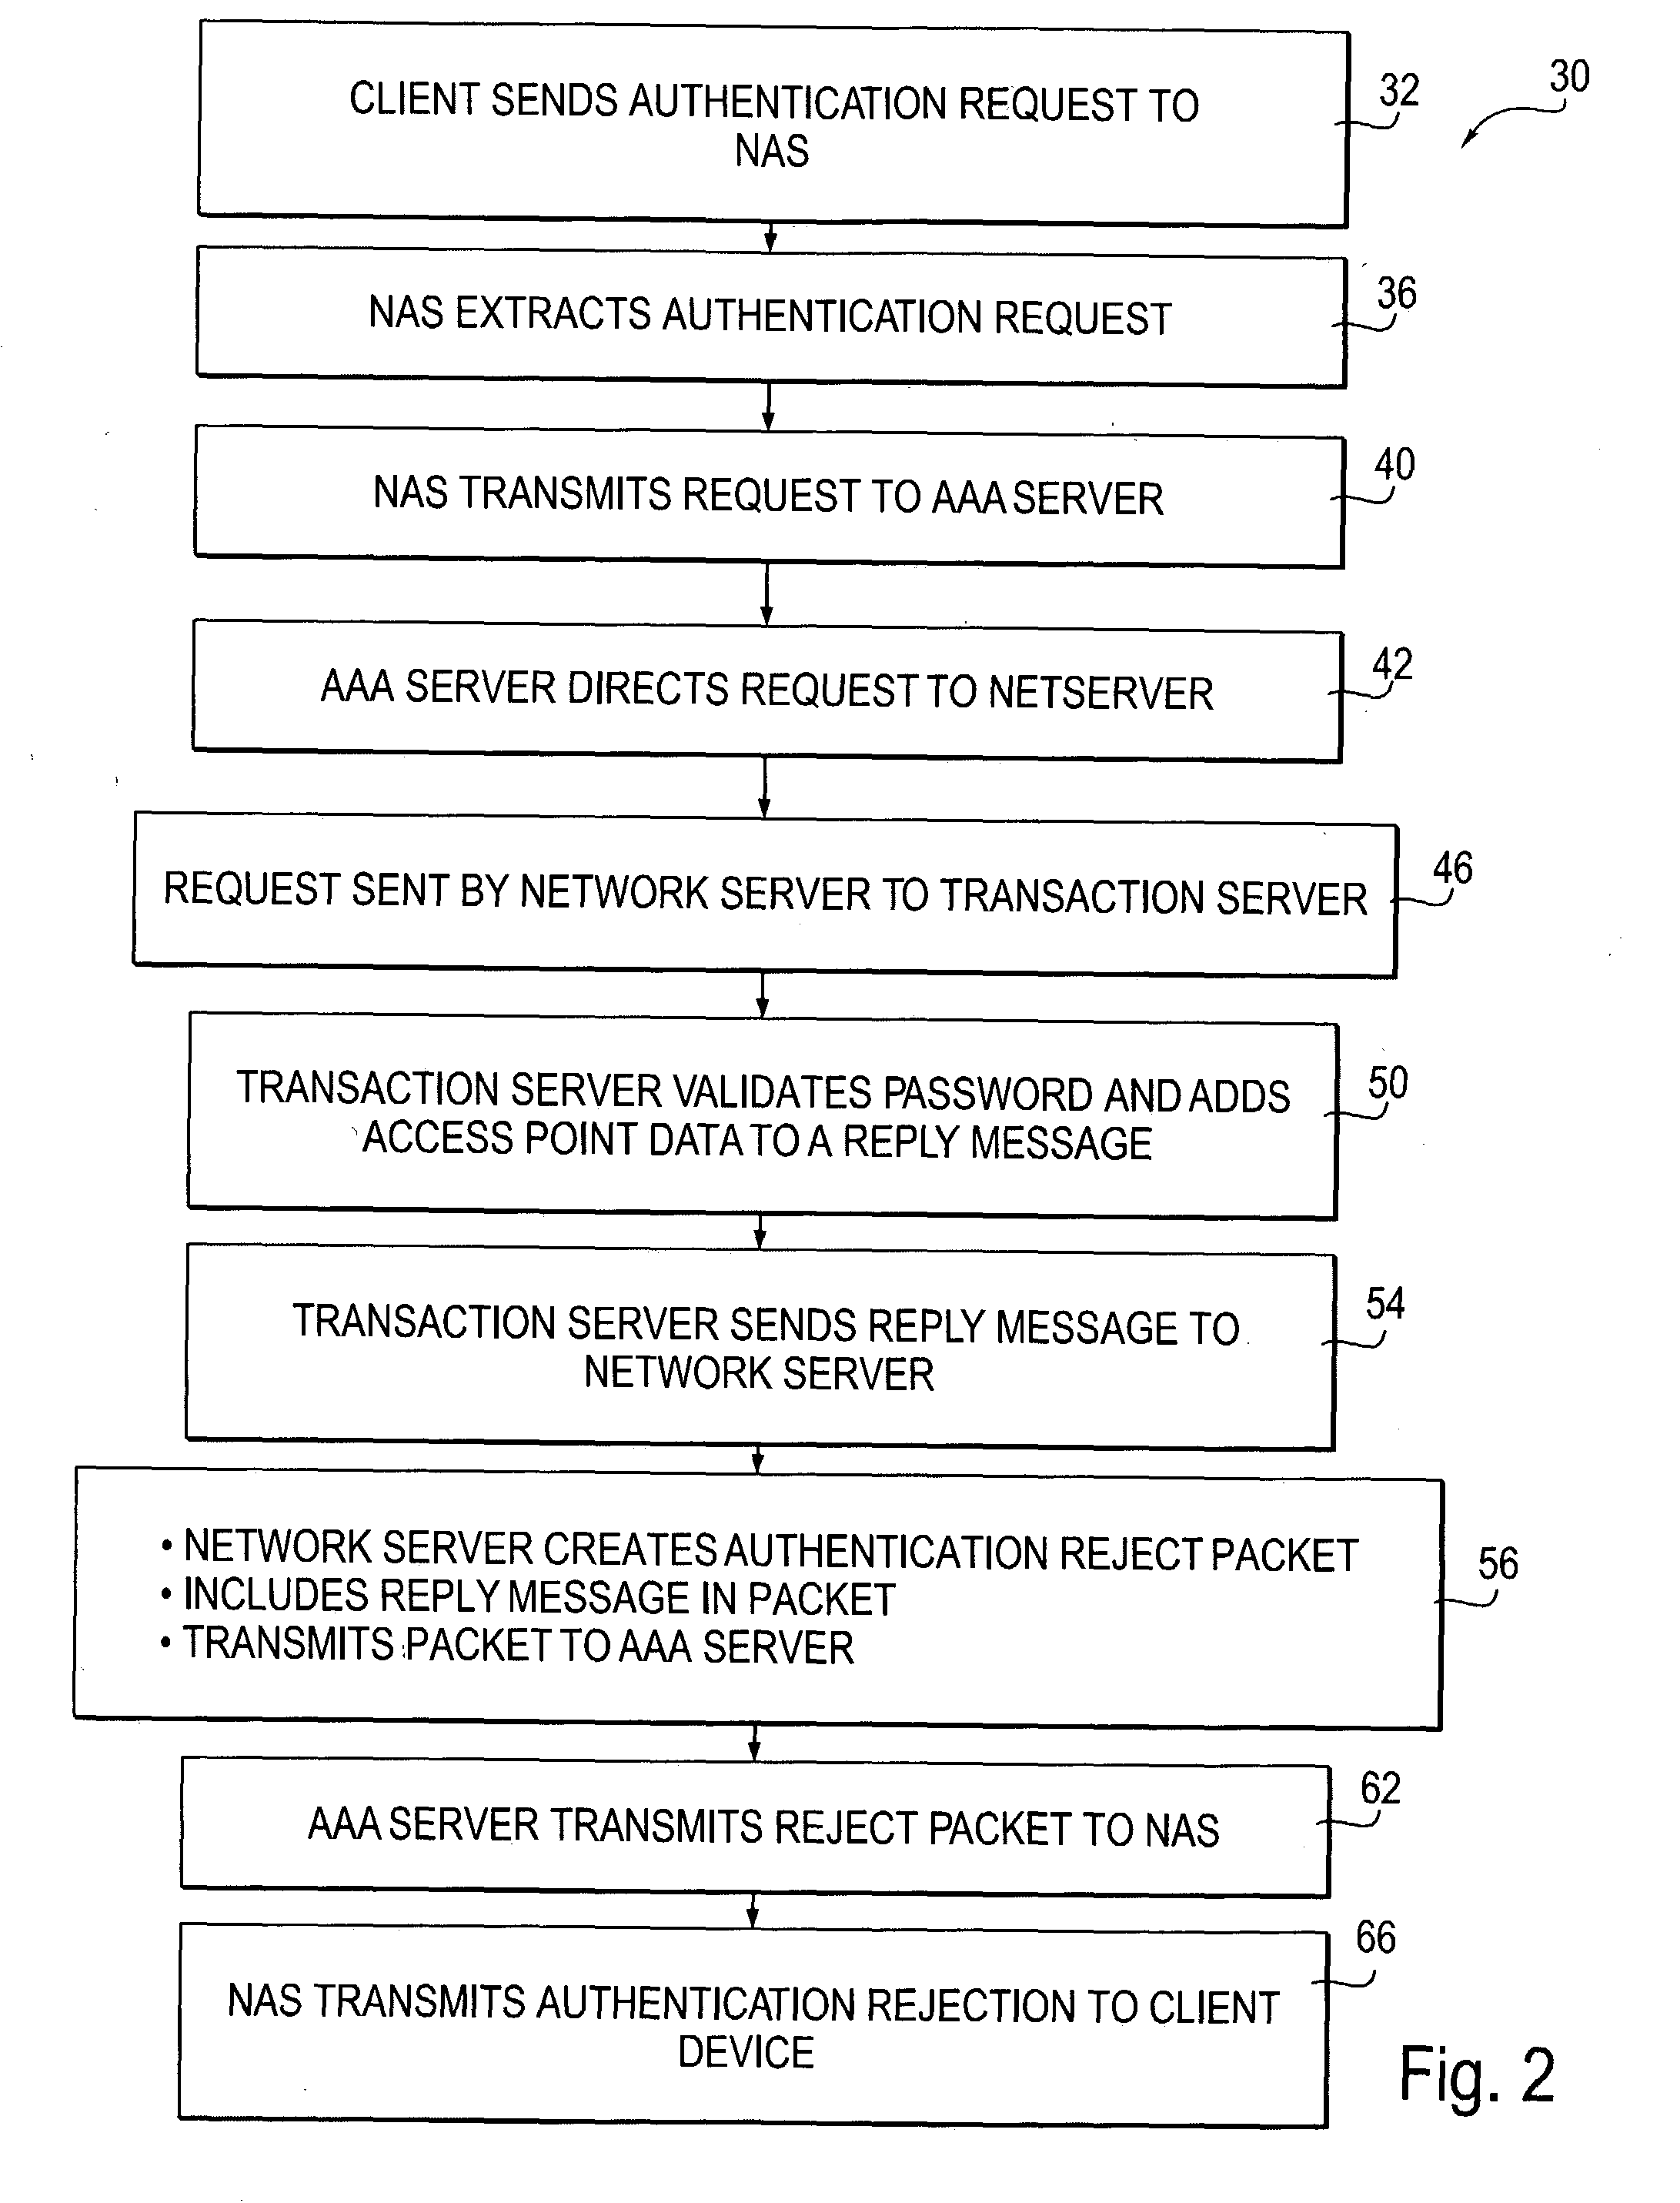 Method and system of providing access point data associated with a network access point